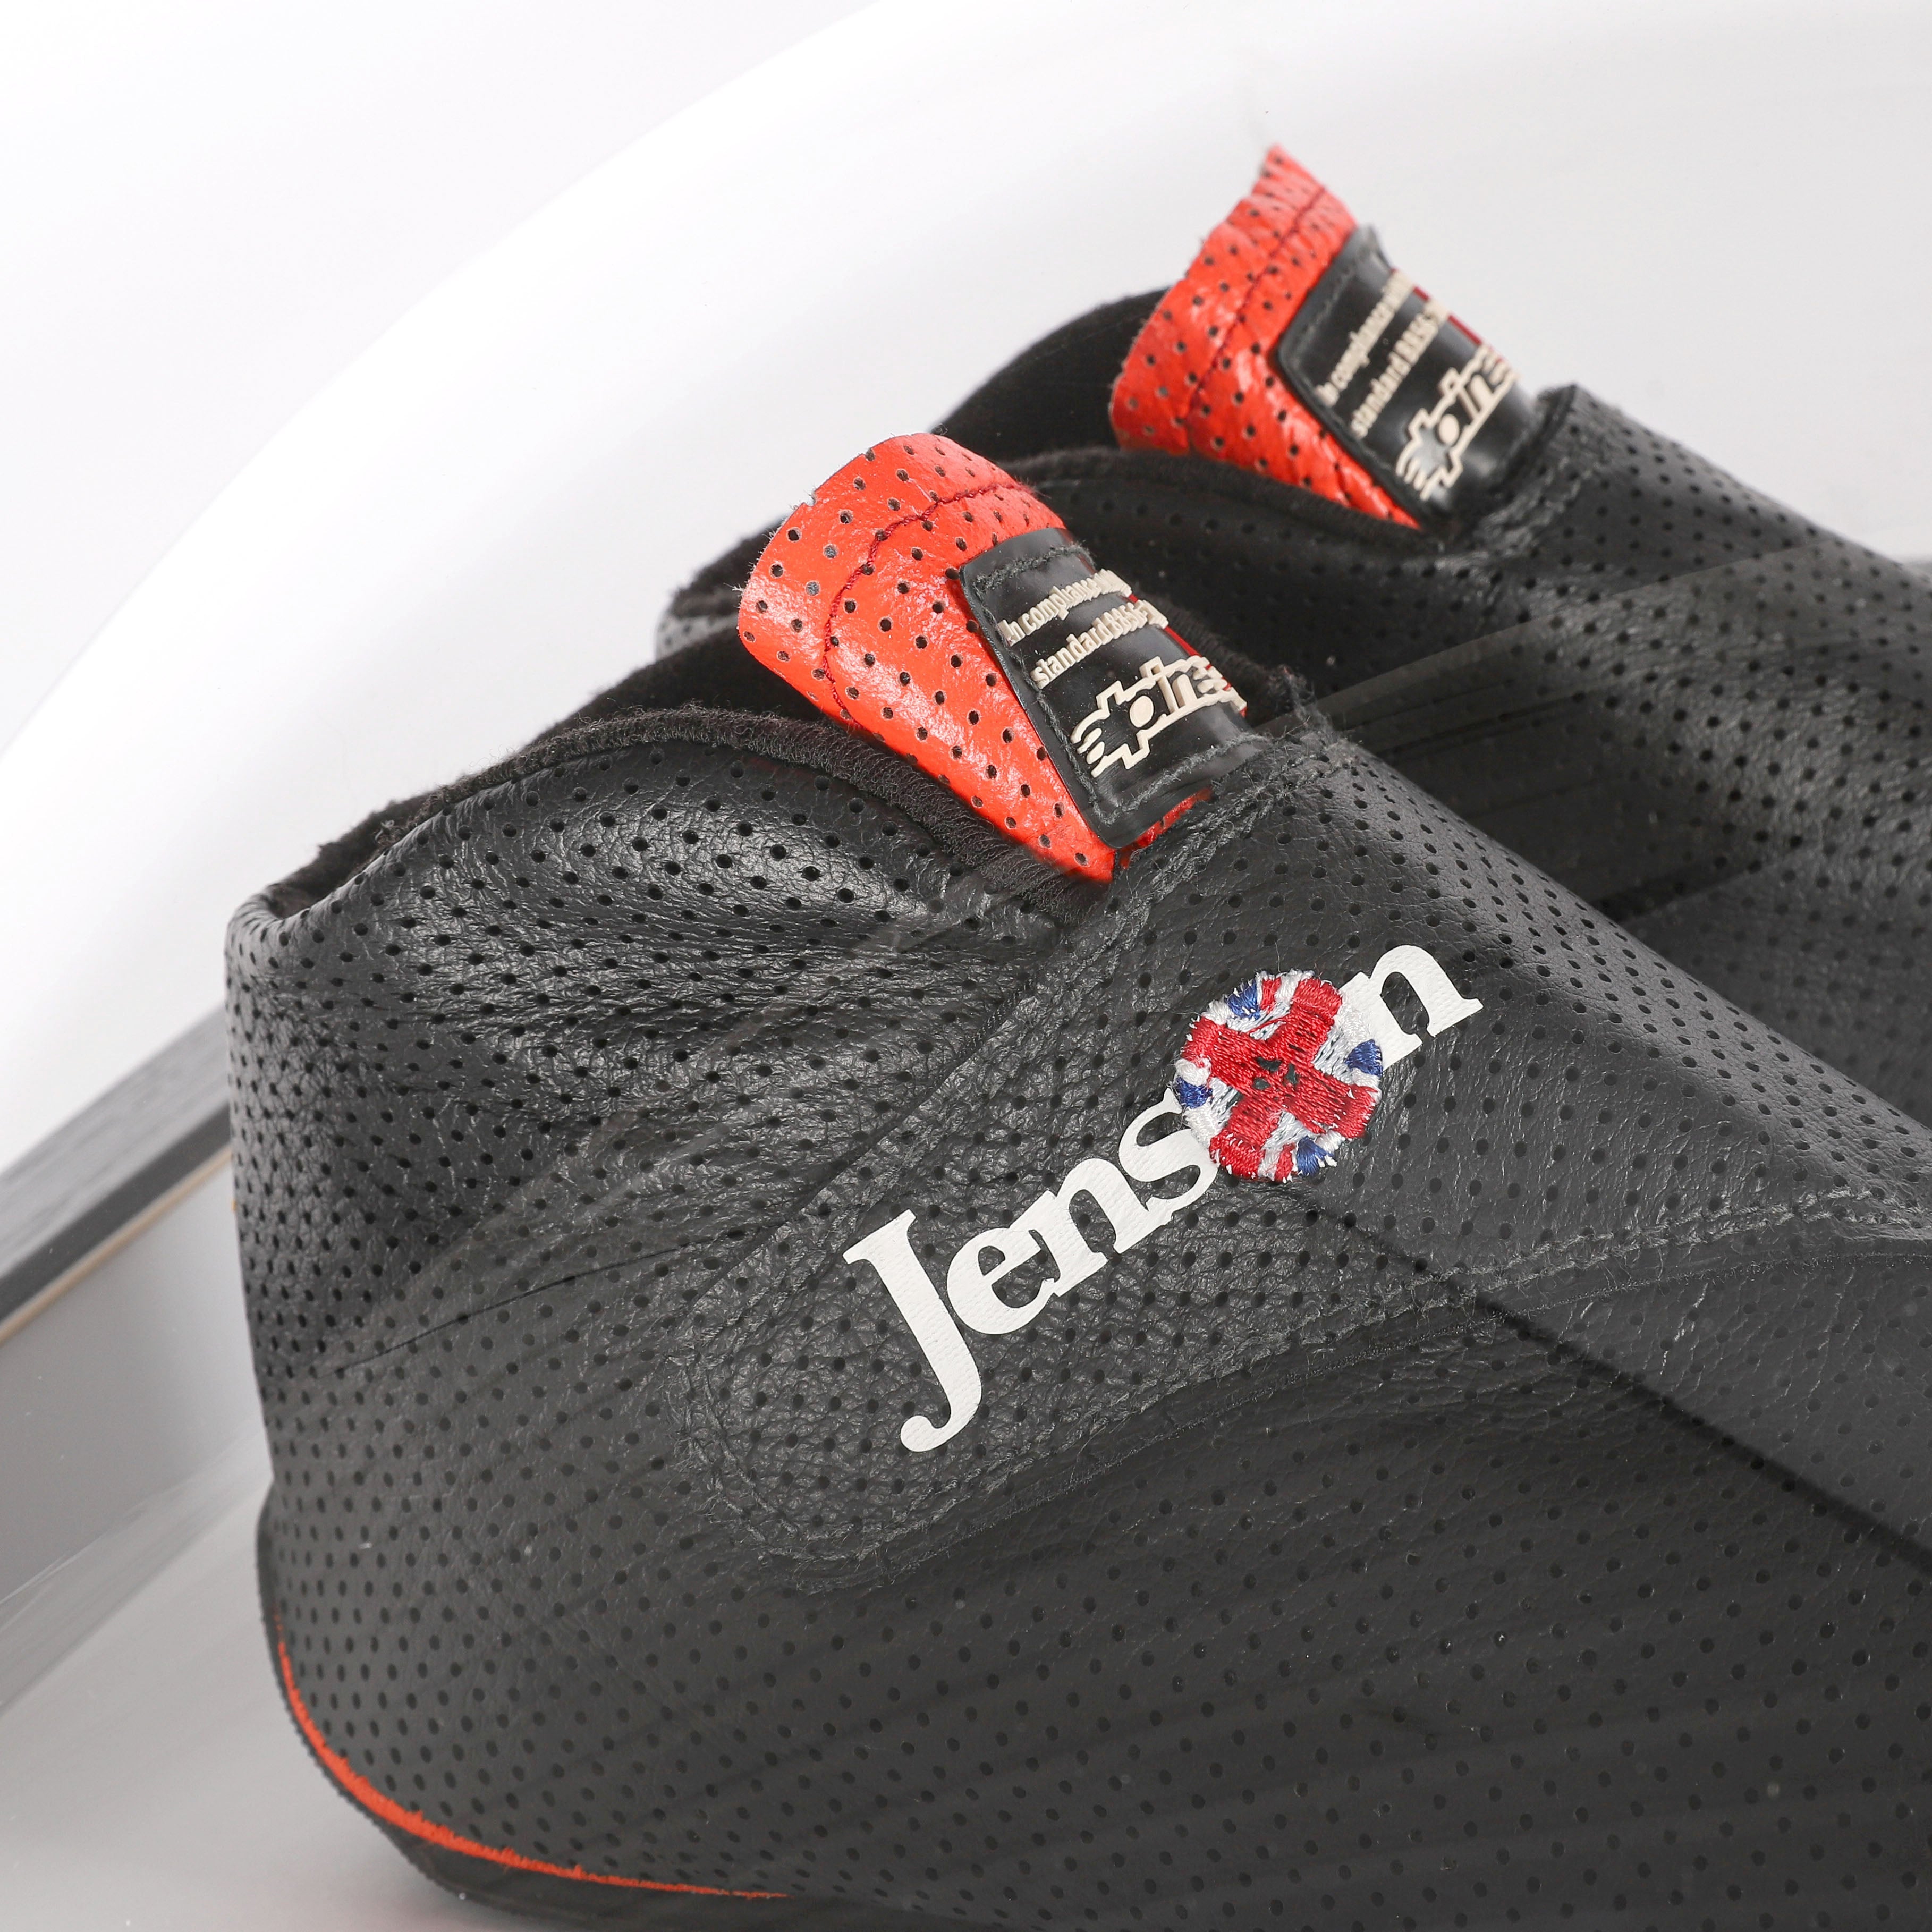 Officially Licensed 2013 McLaren F1 Team Boots - Jenson Button Edition